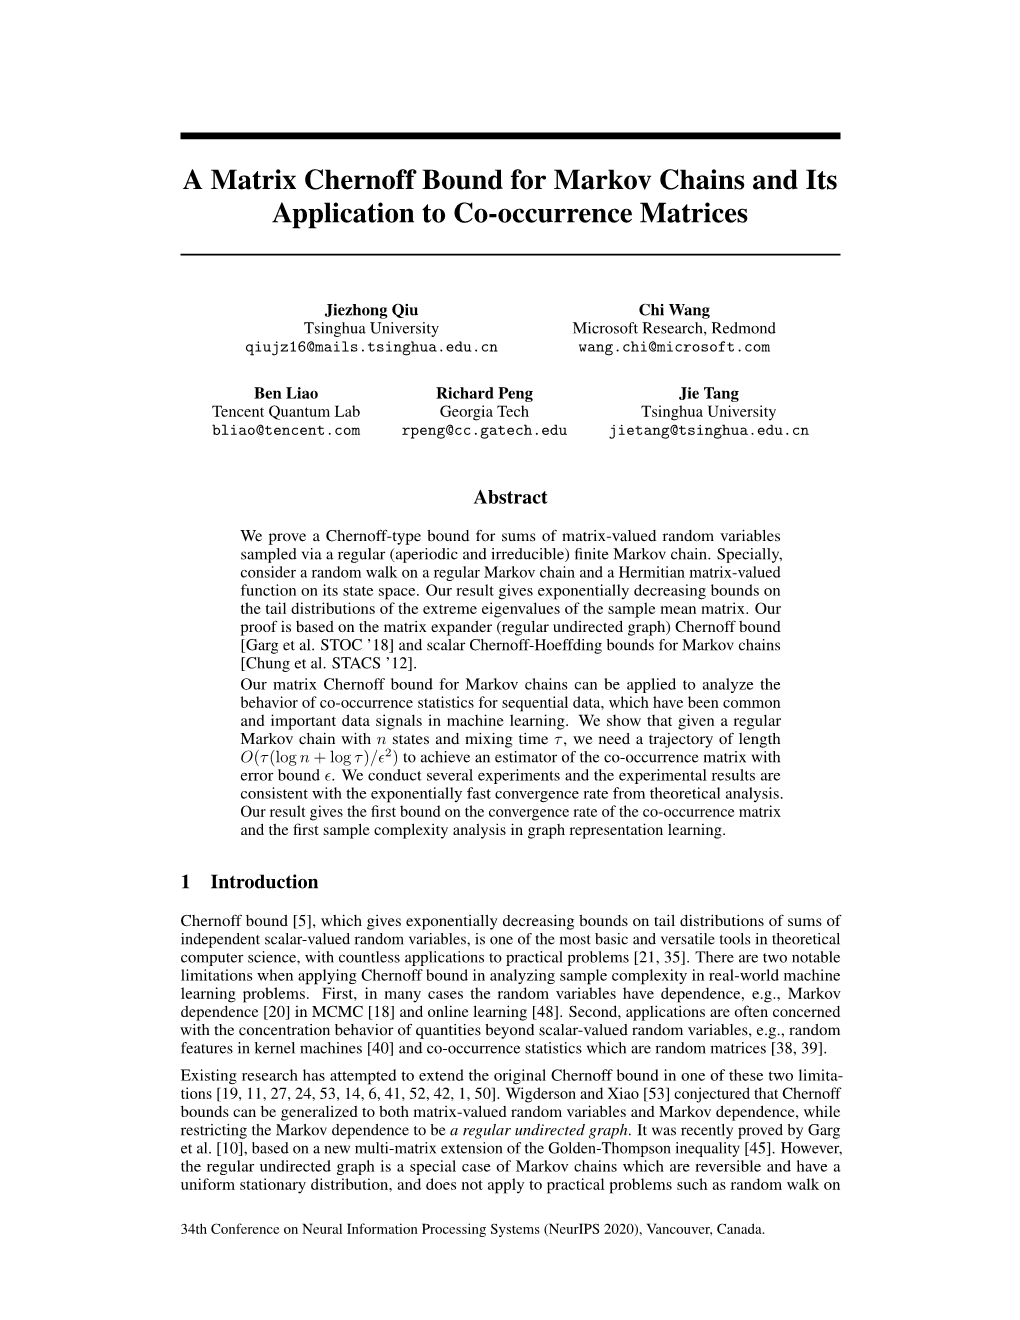 A Matrix Chernoff Bound for Markov Chains and Its Application to Co-Occurrence Matrices